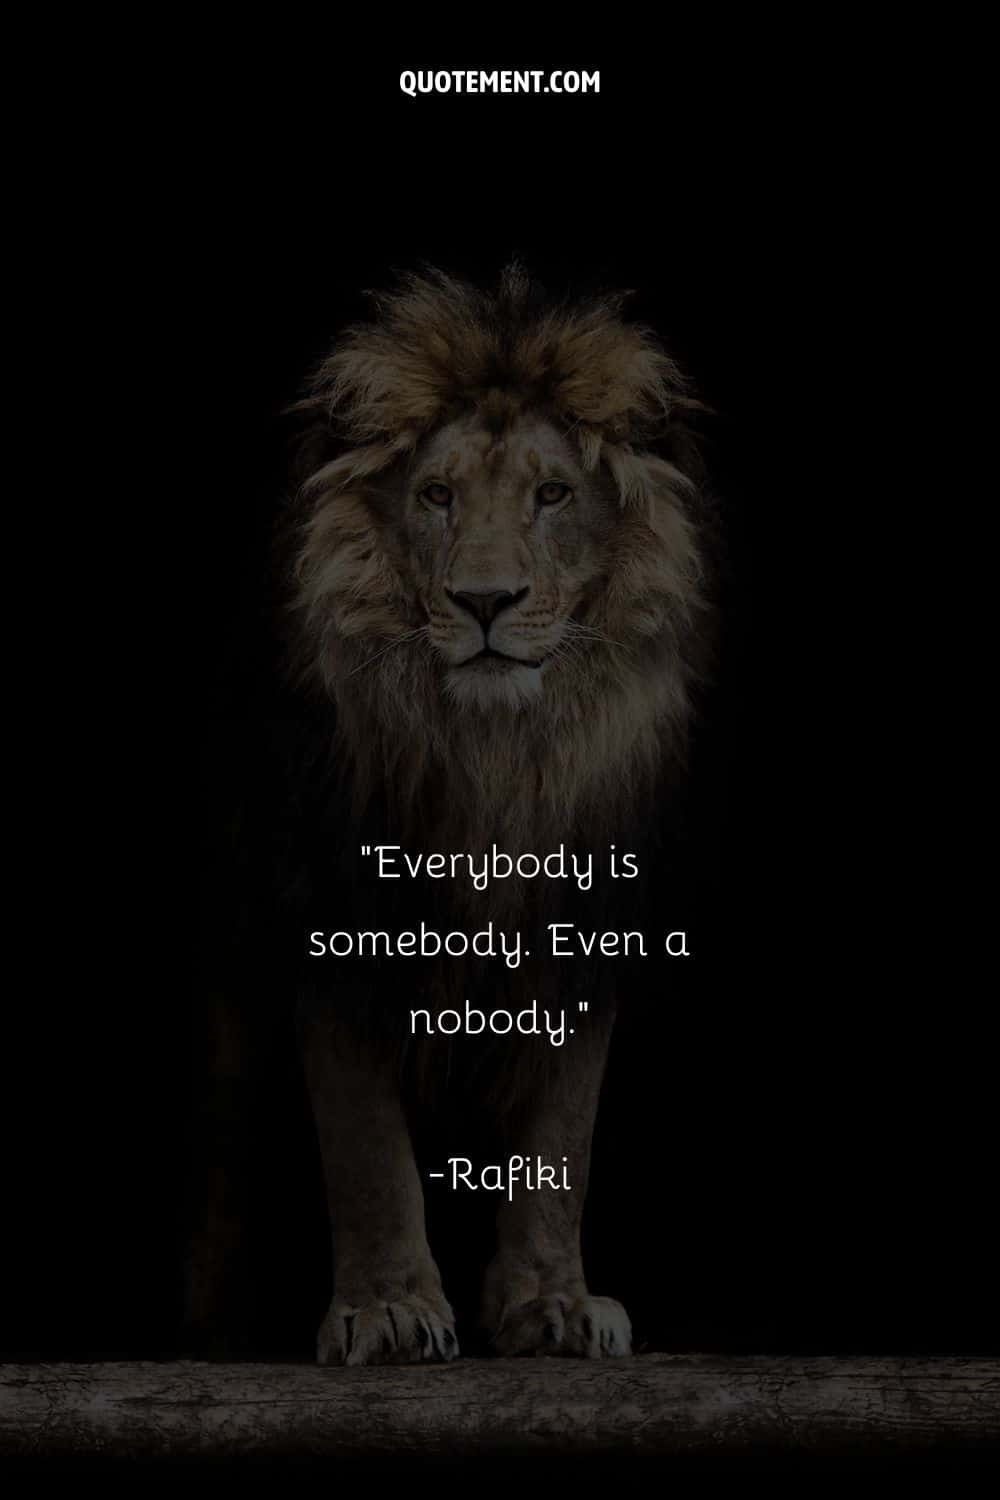 Everybody is somebody. Even a nobody.